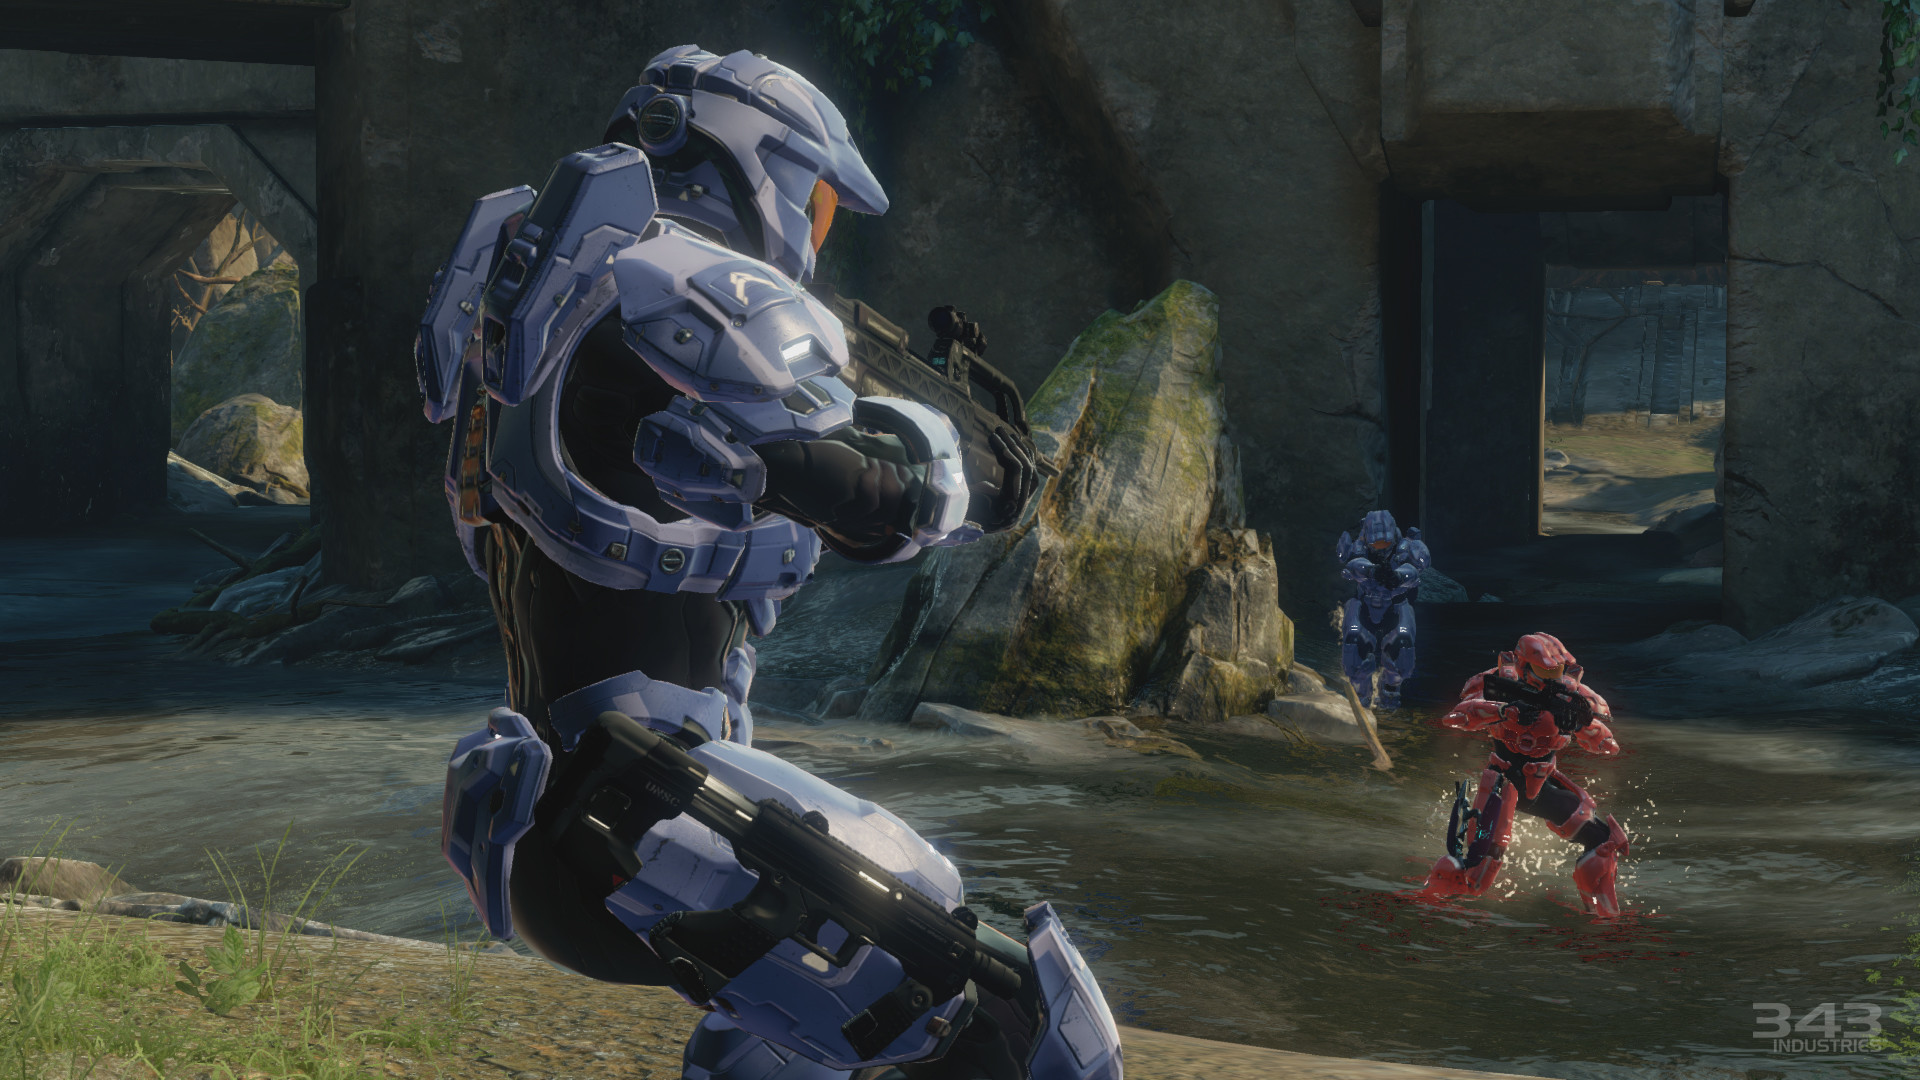 I have no idea why pretty much the only images for H2A are Spartan  hindquarters.